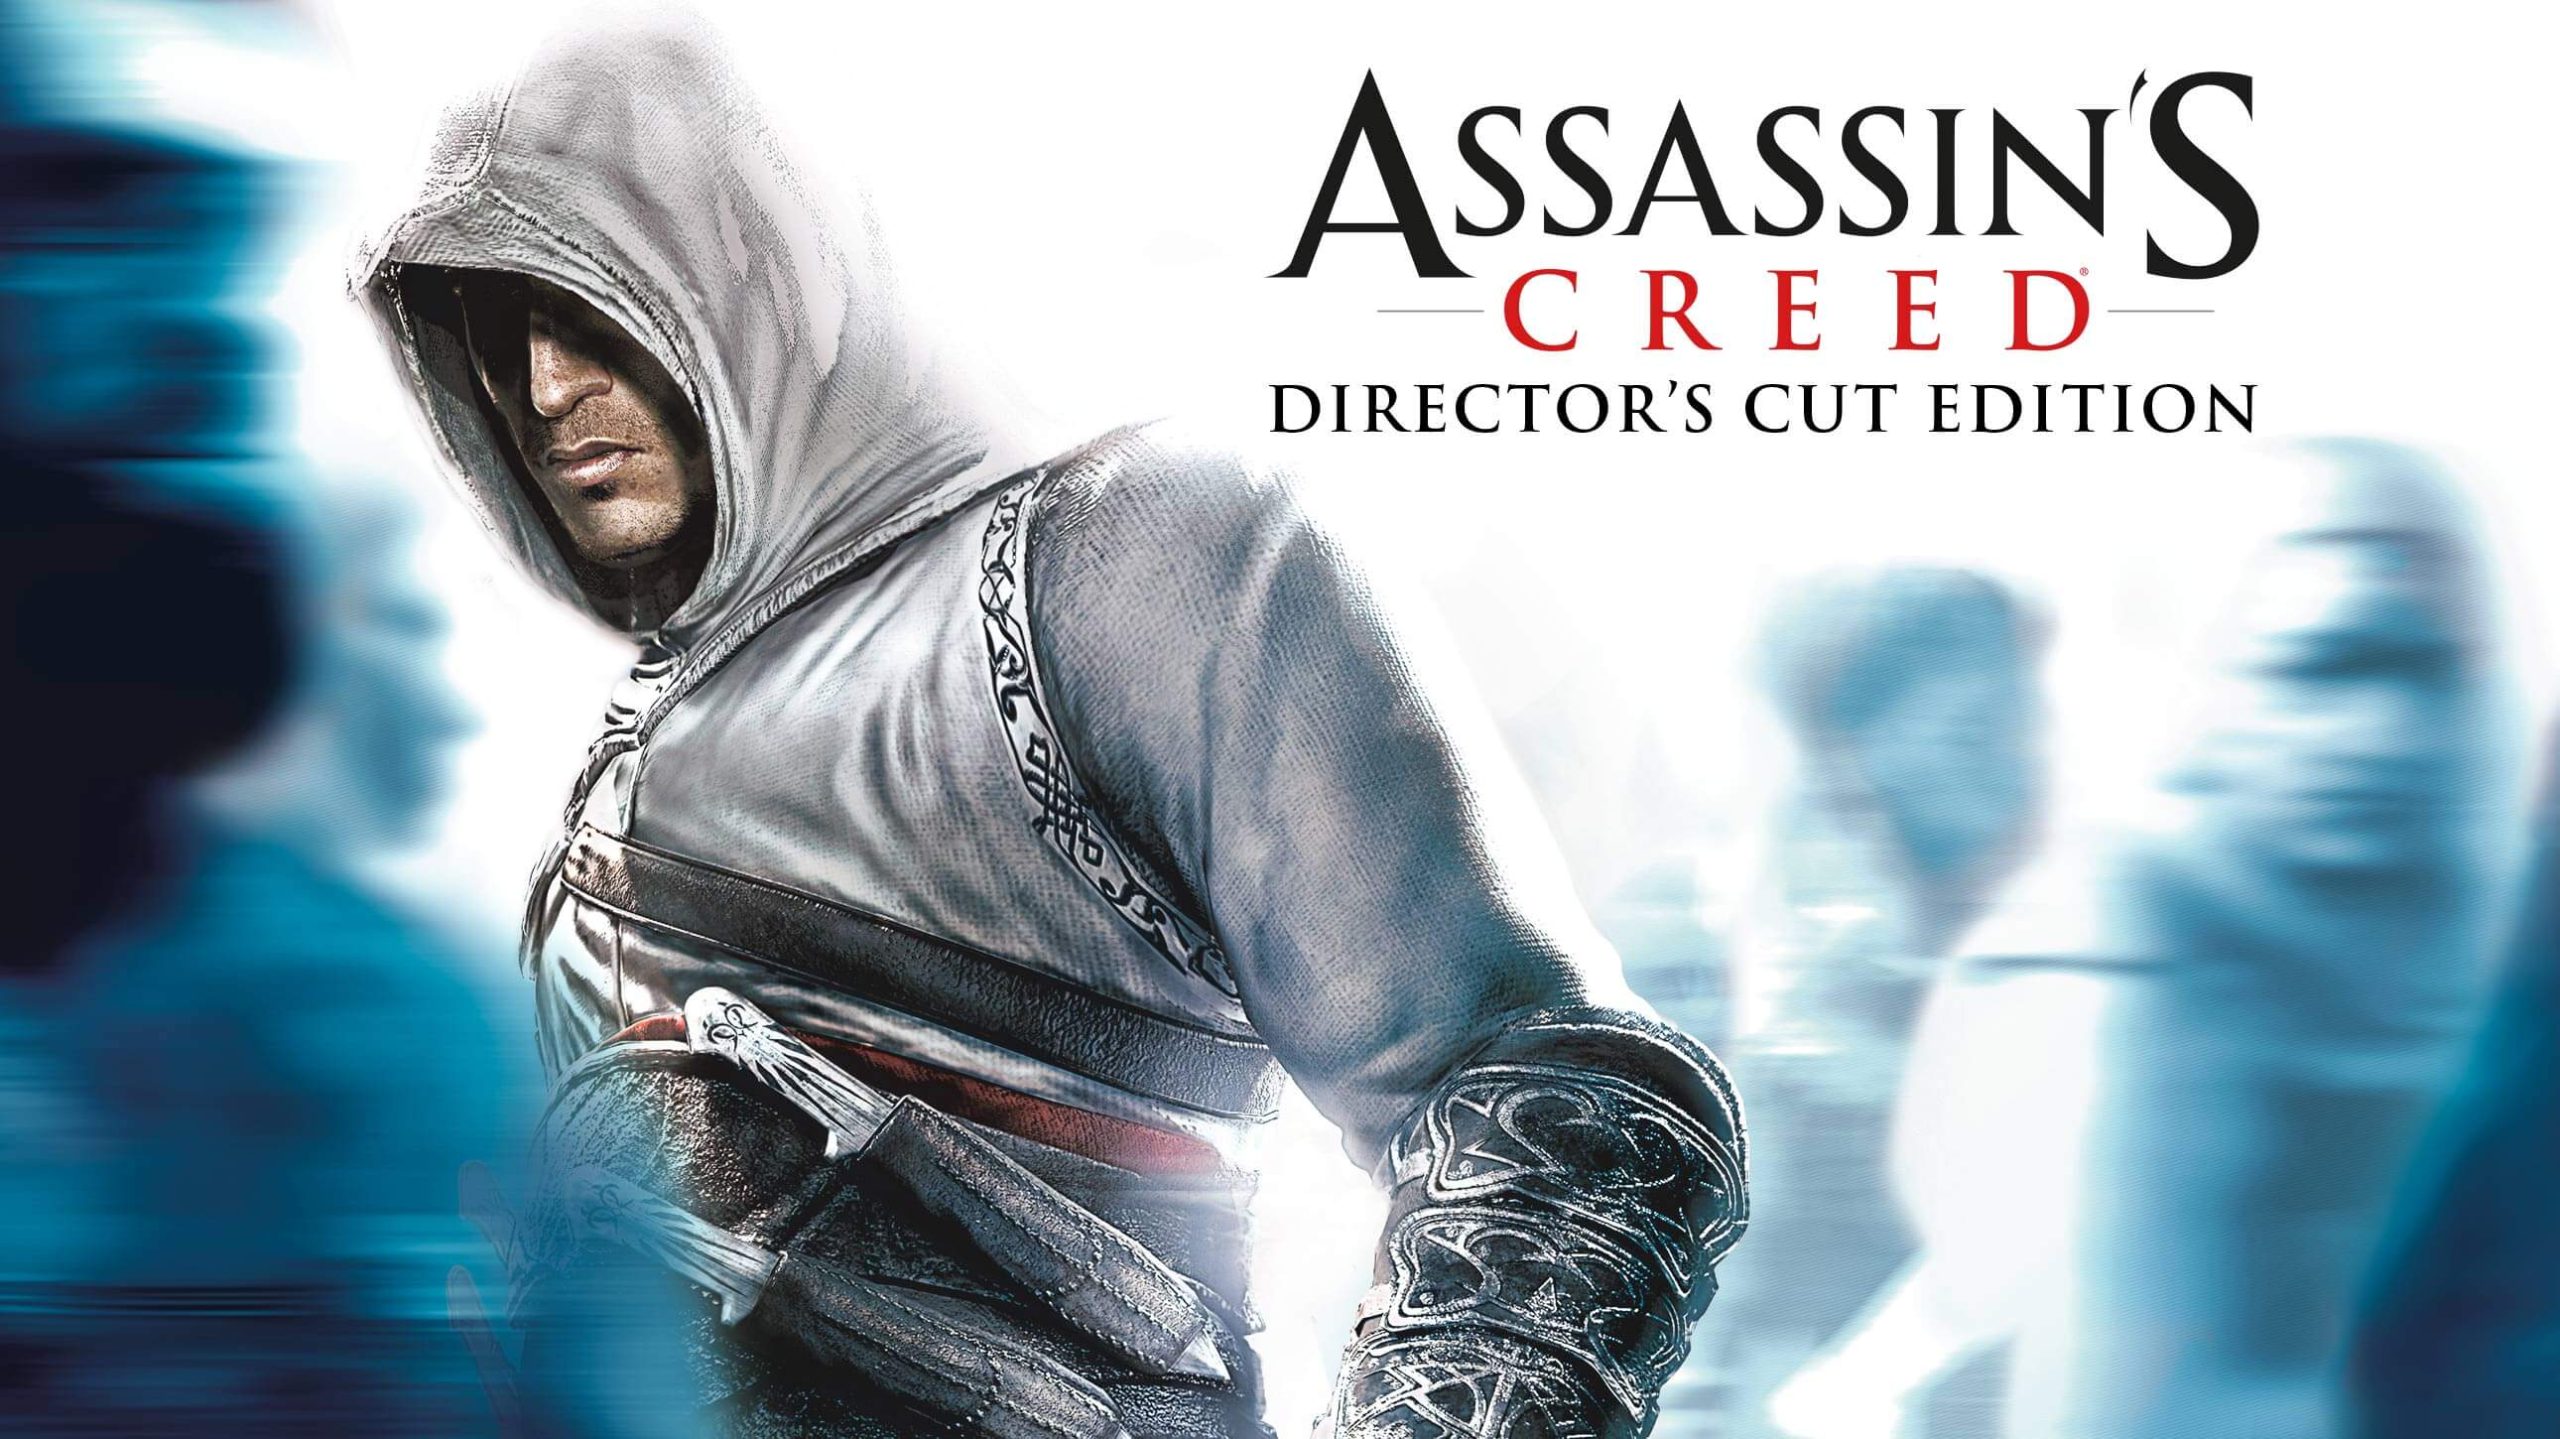 Download Assassins Creed 1 Game Full Version